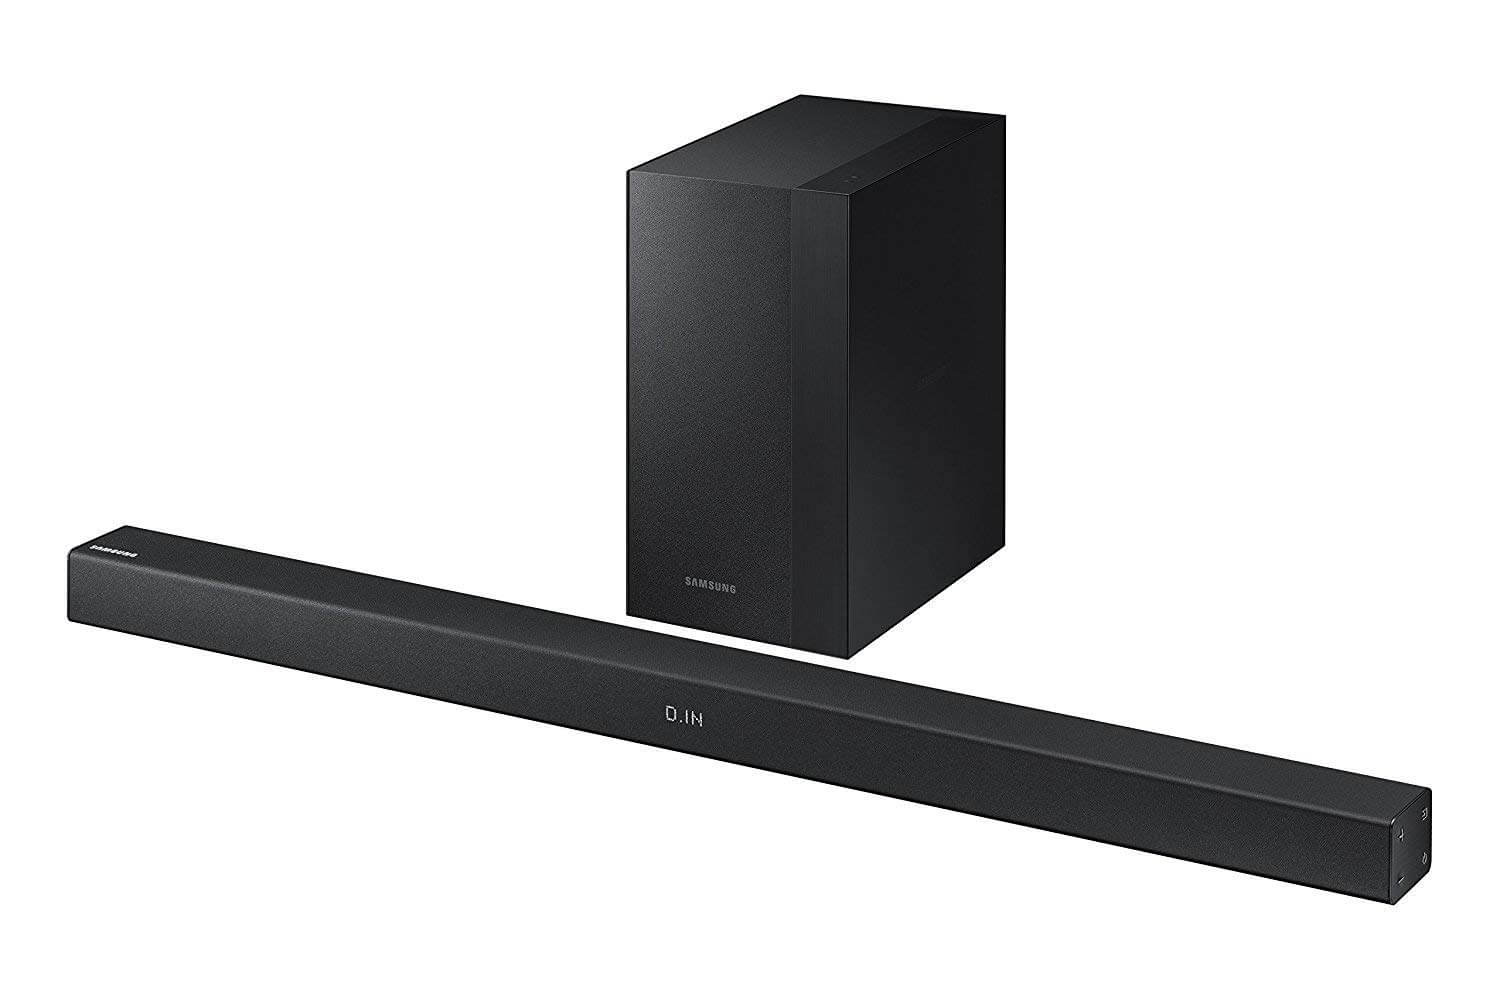 Samsung Sound Bar with Wireless Active Subwoofer Home Theater System